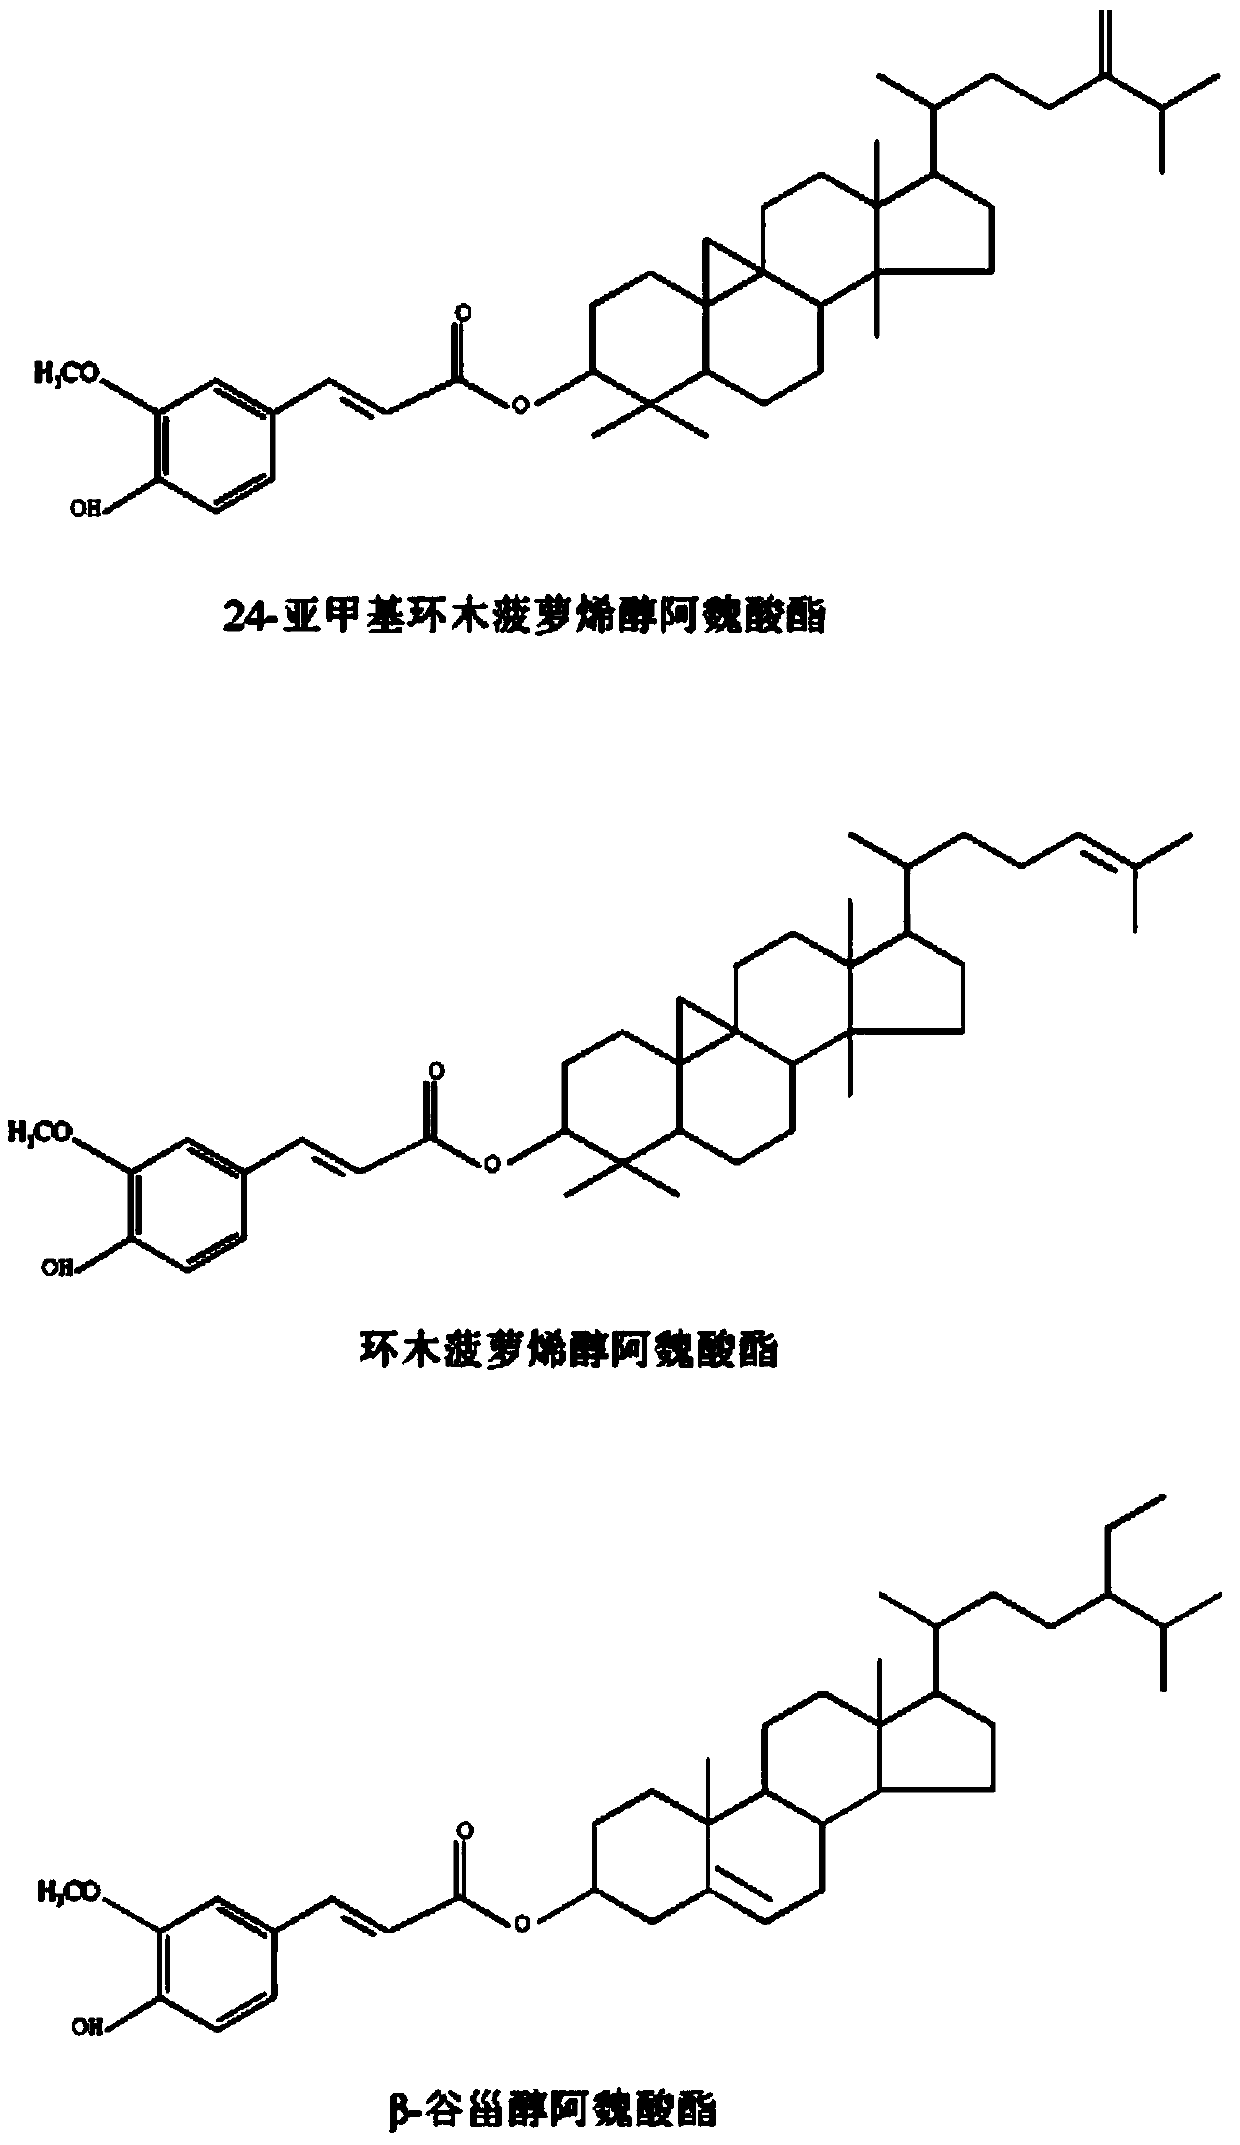 Application of sterol phenolic ester to preparation of breast cancer prevention and treatment medicine